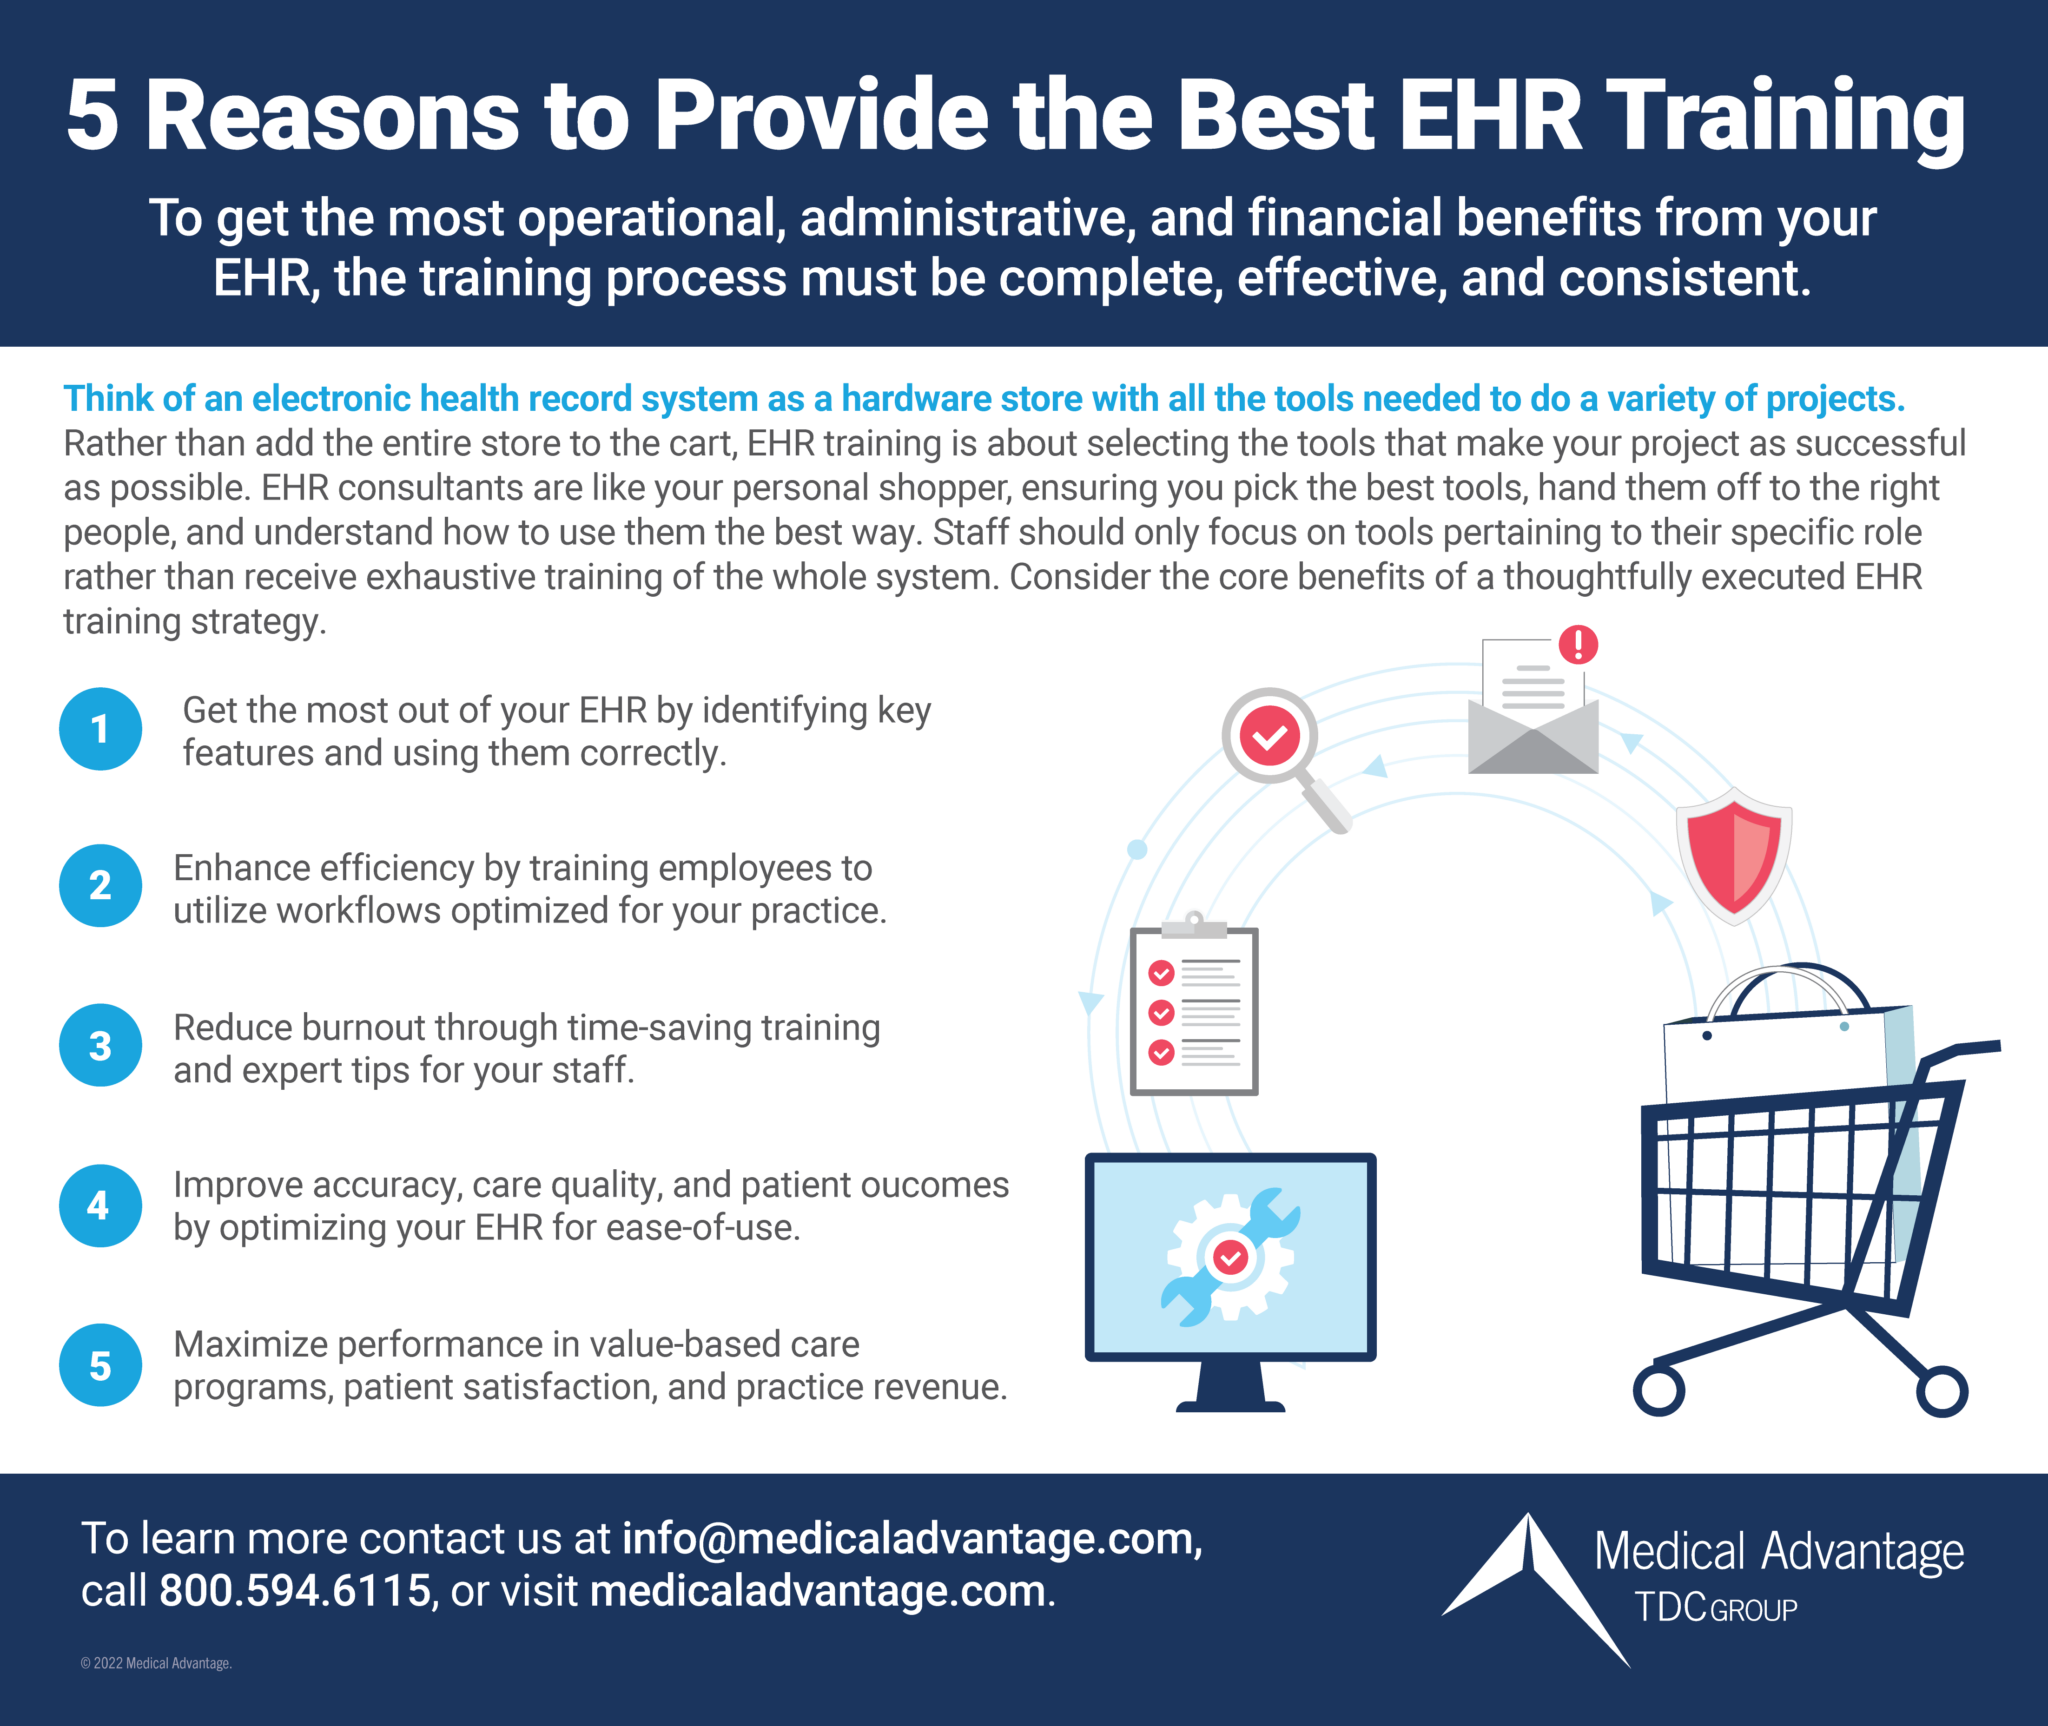 5 Reasons to Provide the Best EHR Training